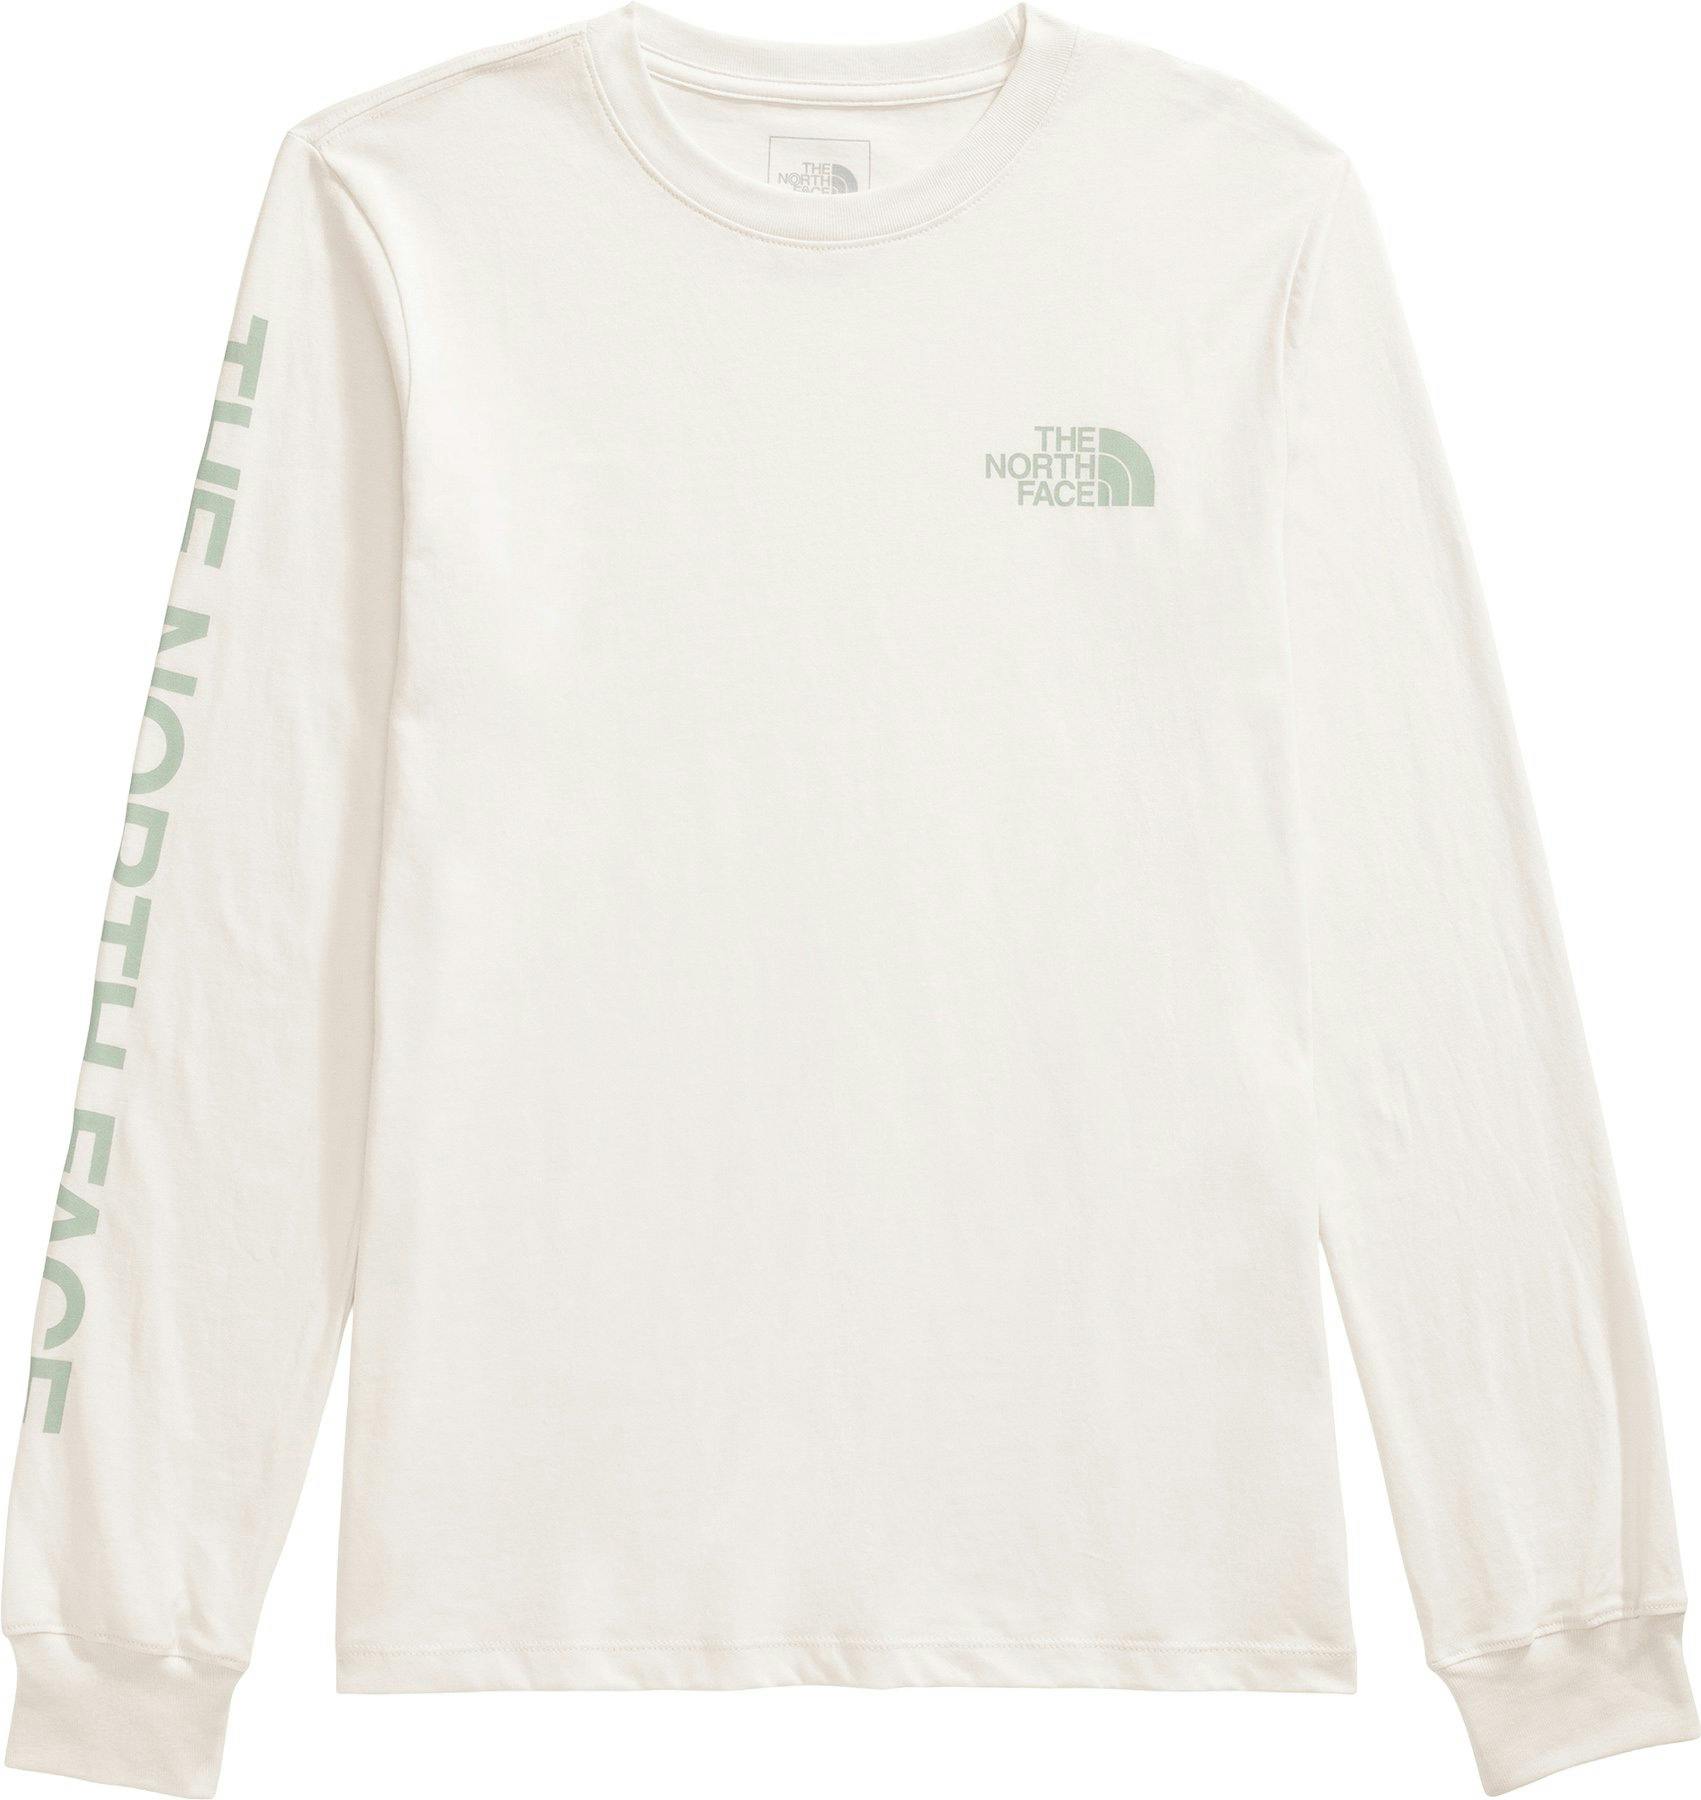 Product image for Sleeve Hit Long Sleeve Graphic Tee - Women’s